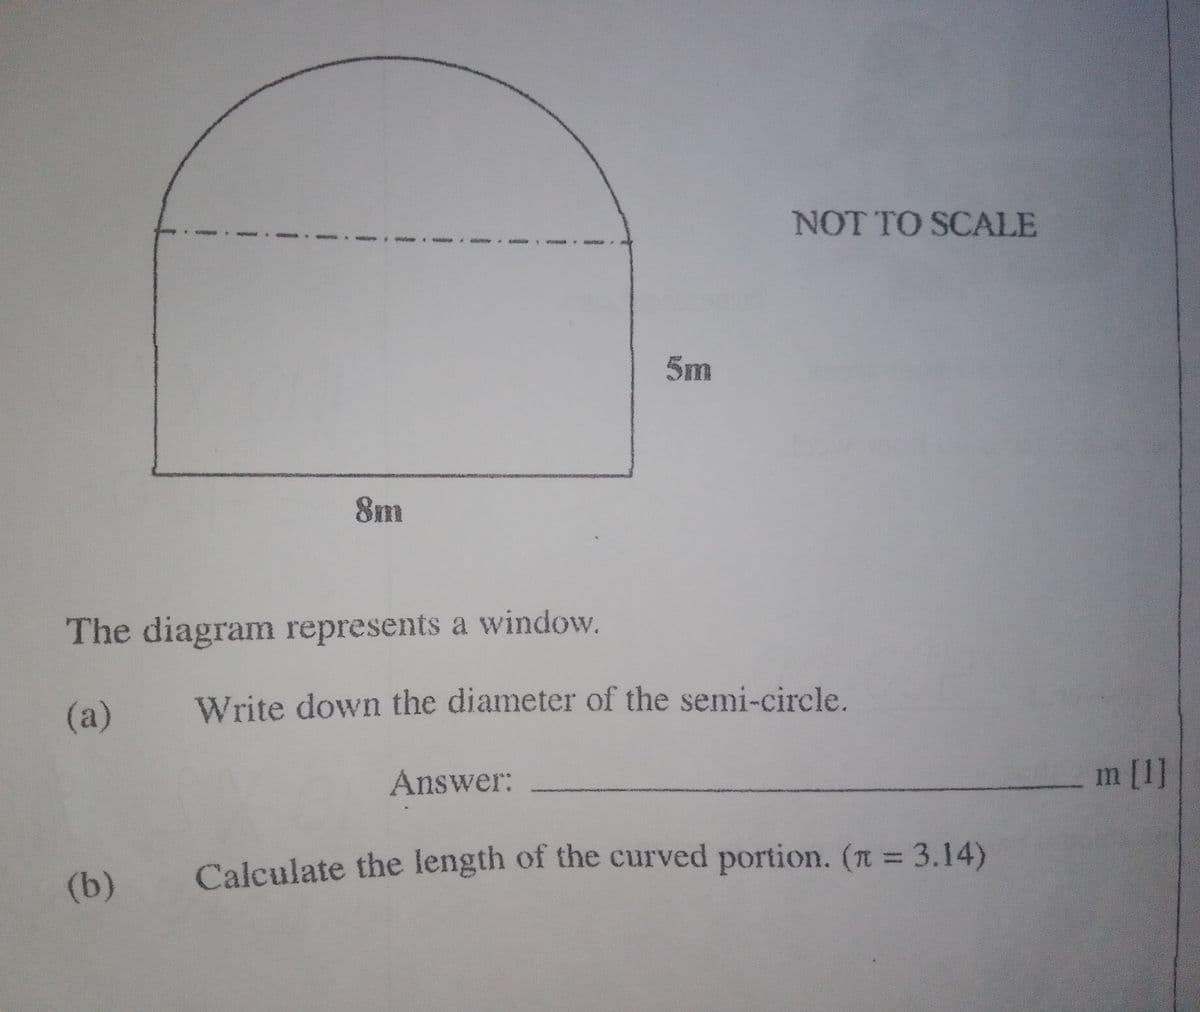 8m
The diagram represents a window.
(a)
(b)
5m
Answer:
NOT TO SCALE
Write down the diameter of the semi-circle.
Calculate the length of the curved portion. (n = 3.14)
m [1]